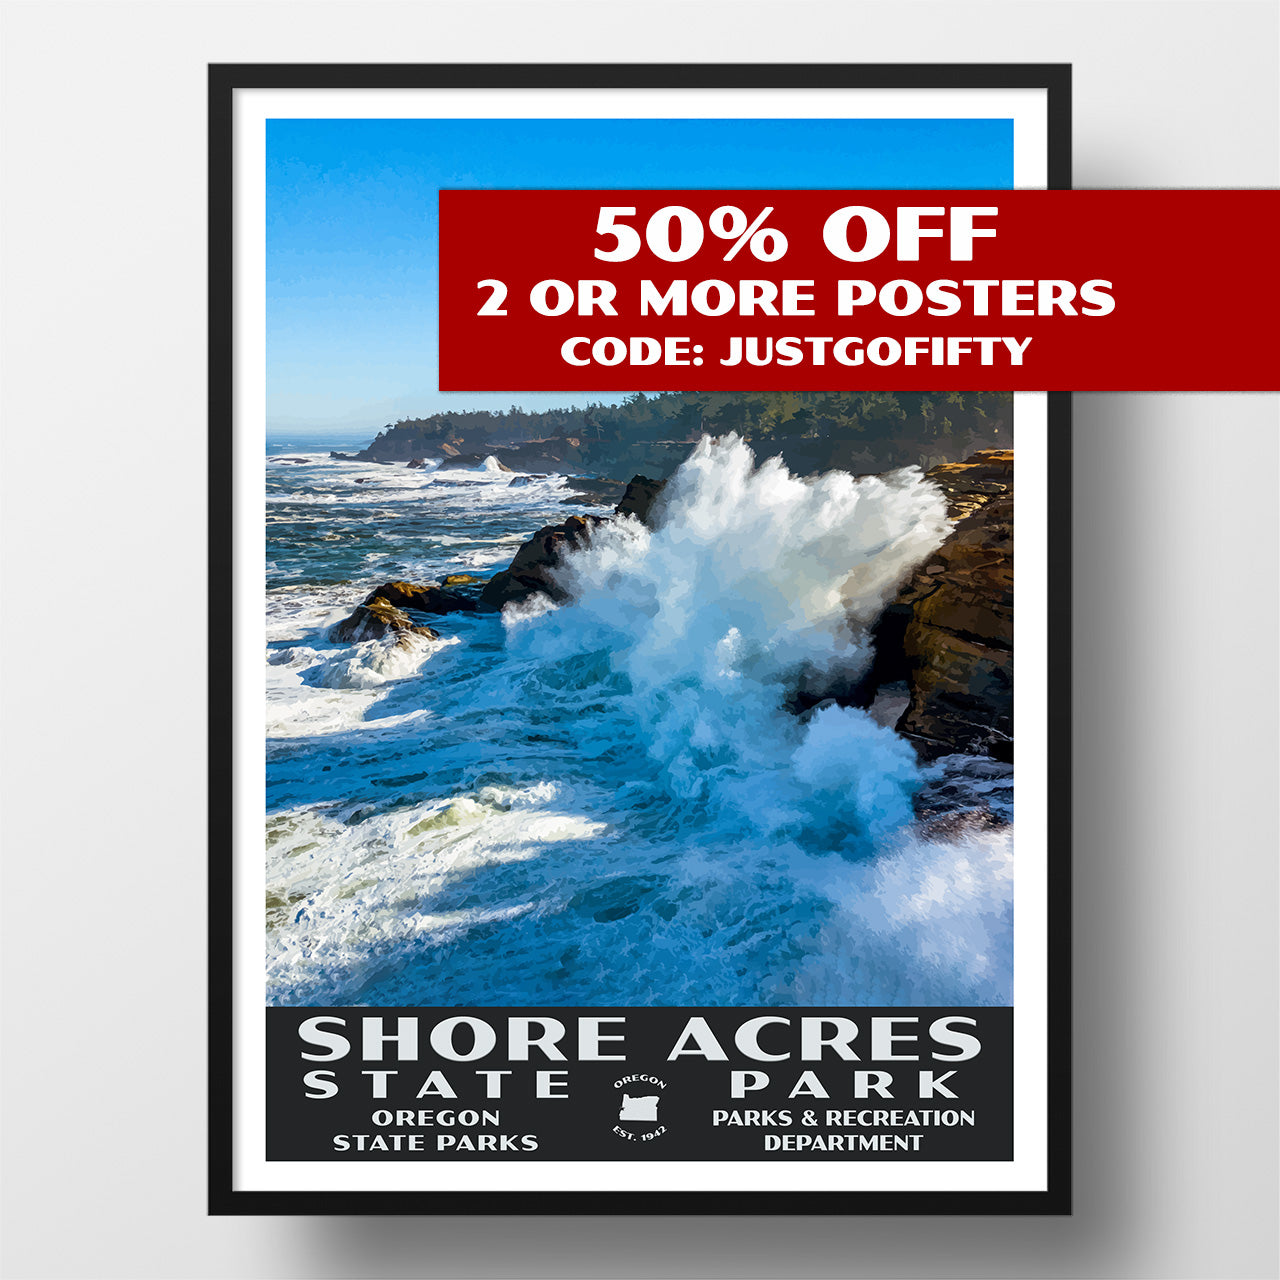 Shore Acres State Park poster